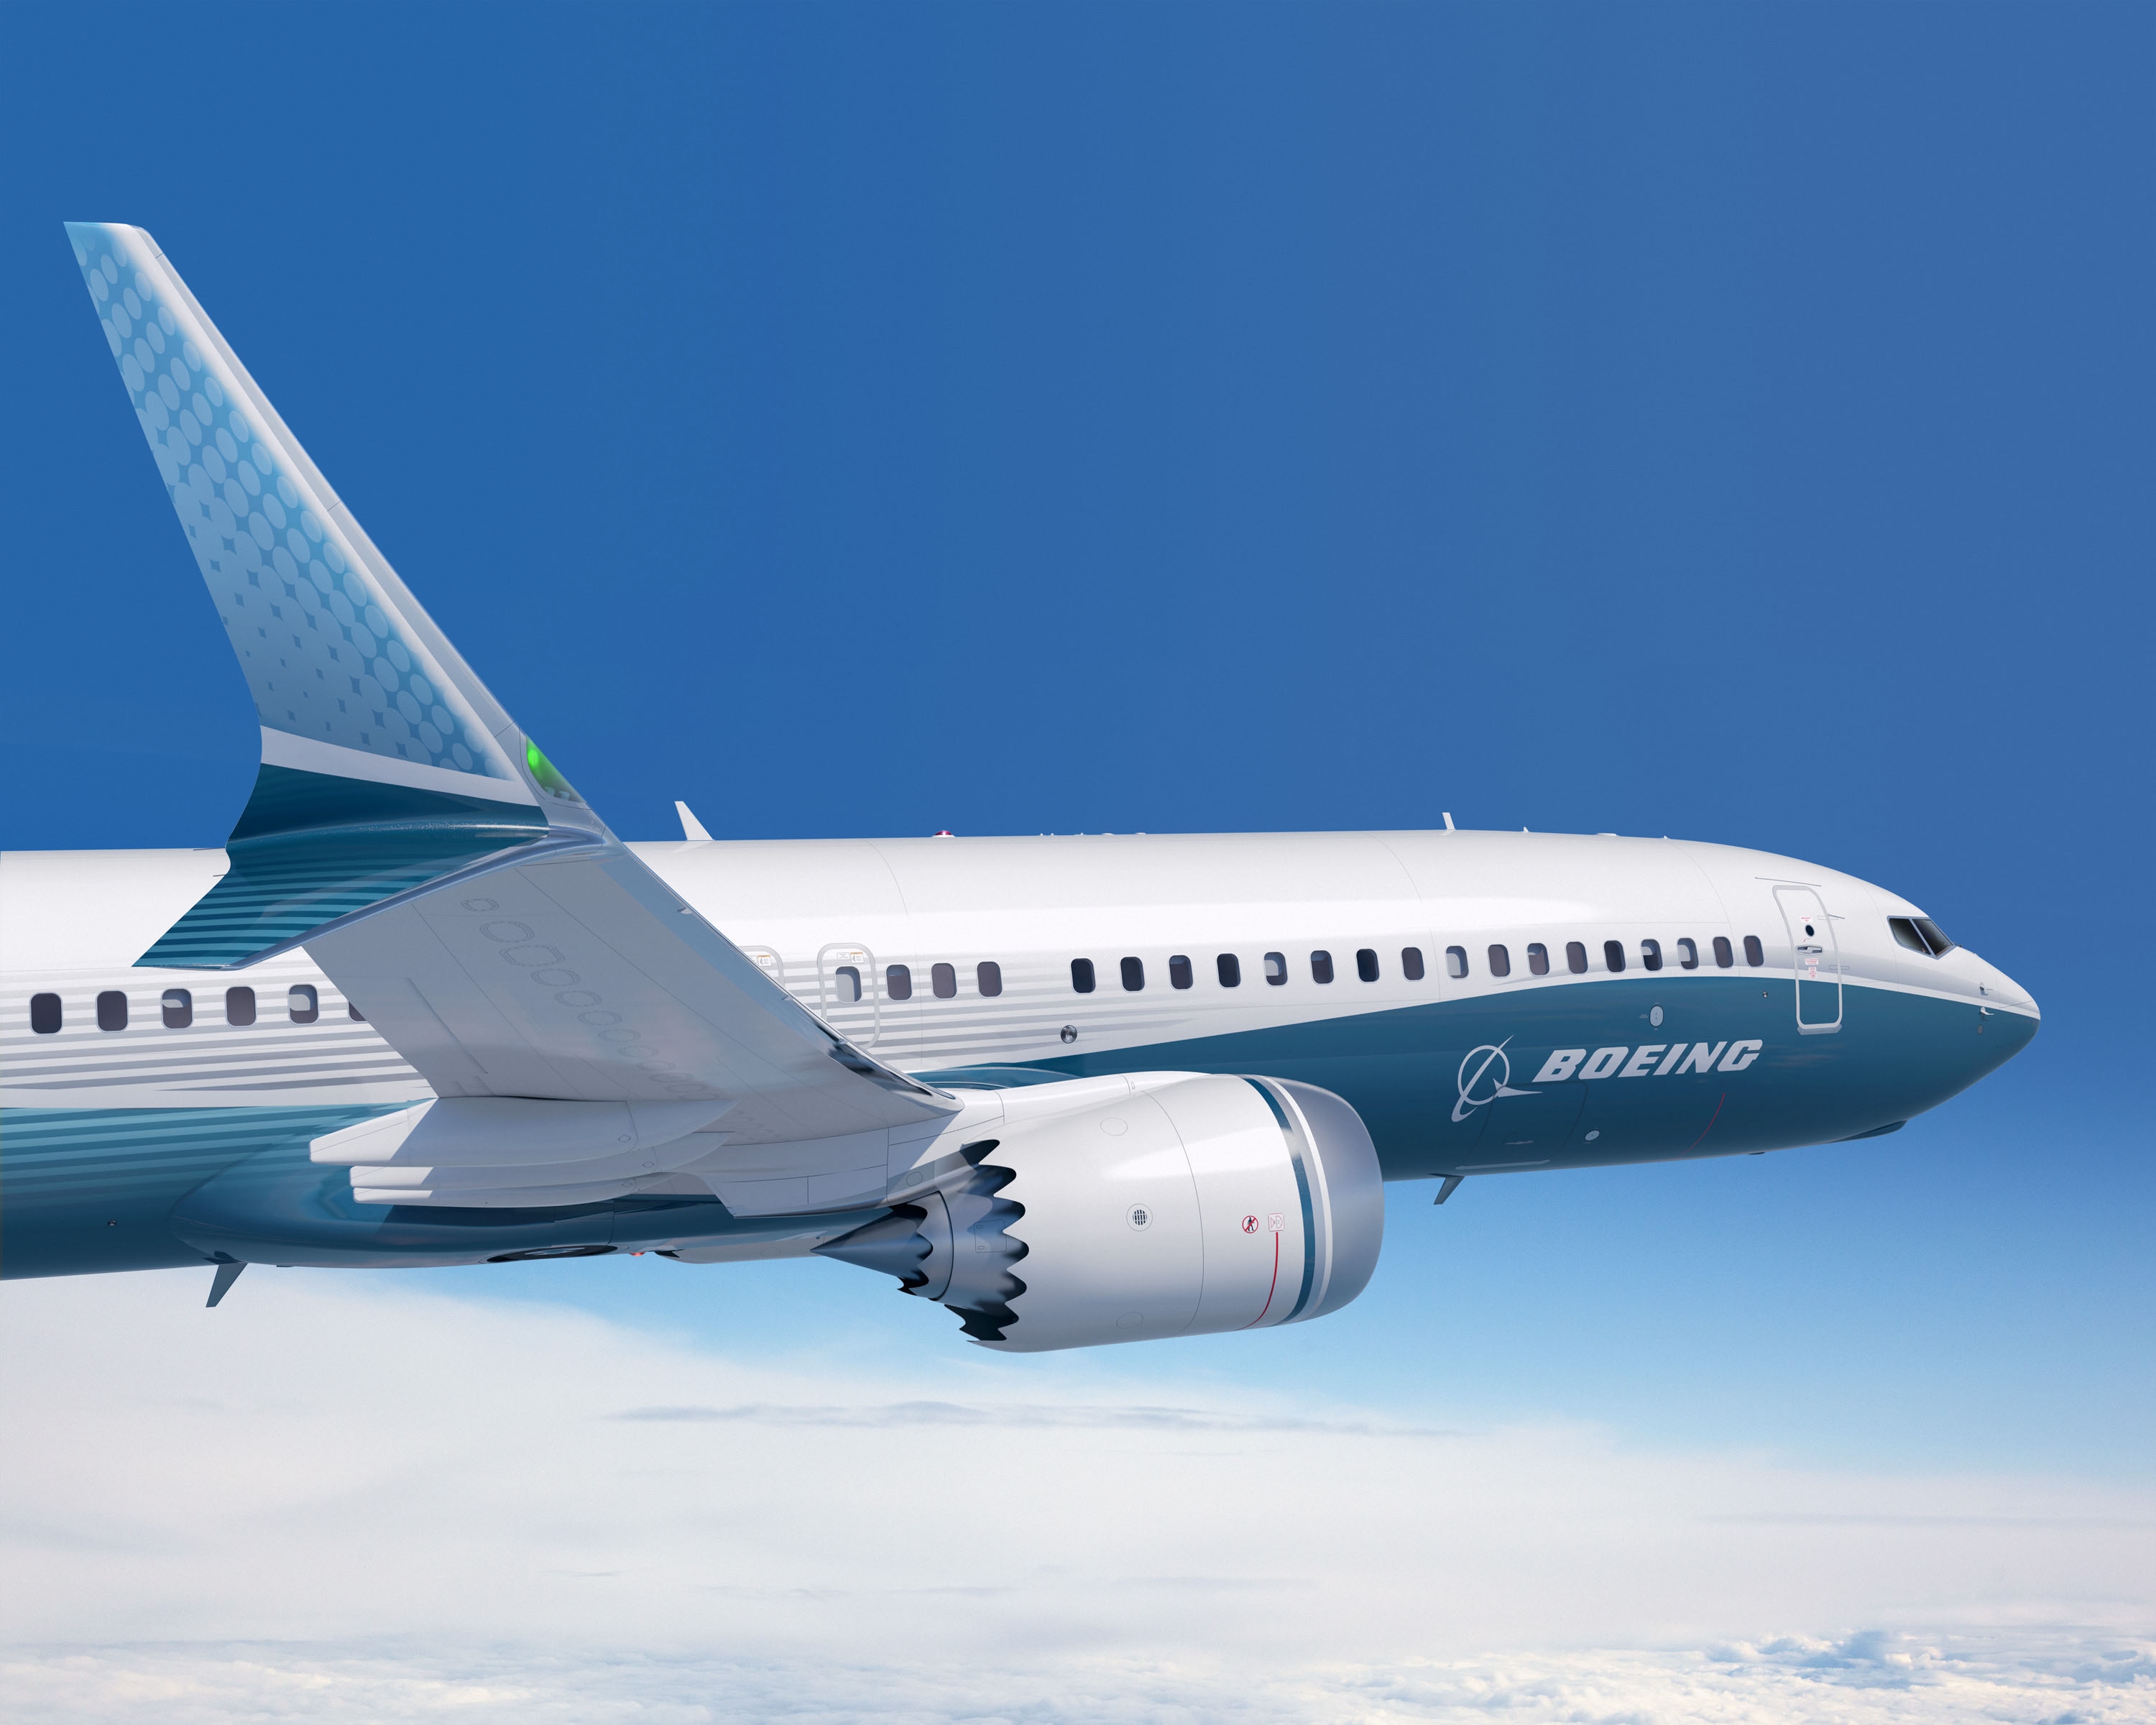 High Resolution Image (click for larger) of what Boeing expects the winglet for the new 737 MAX will look like. Image from Boeing.